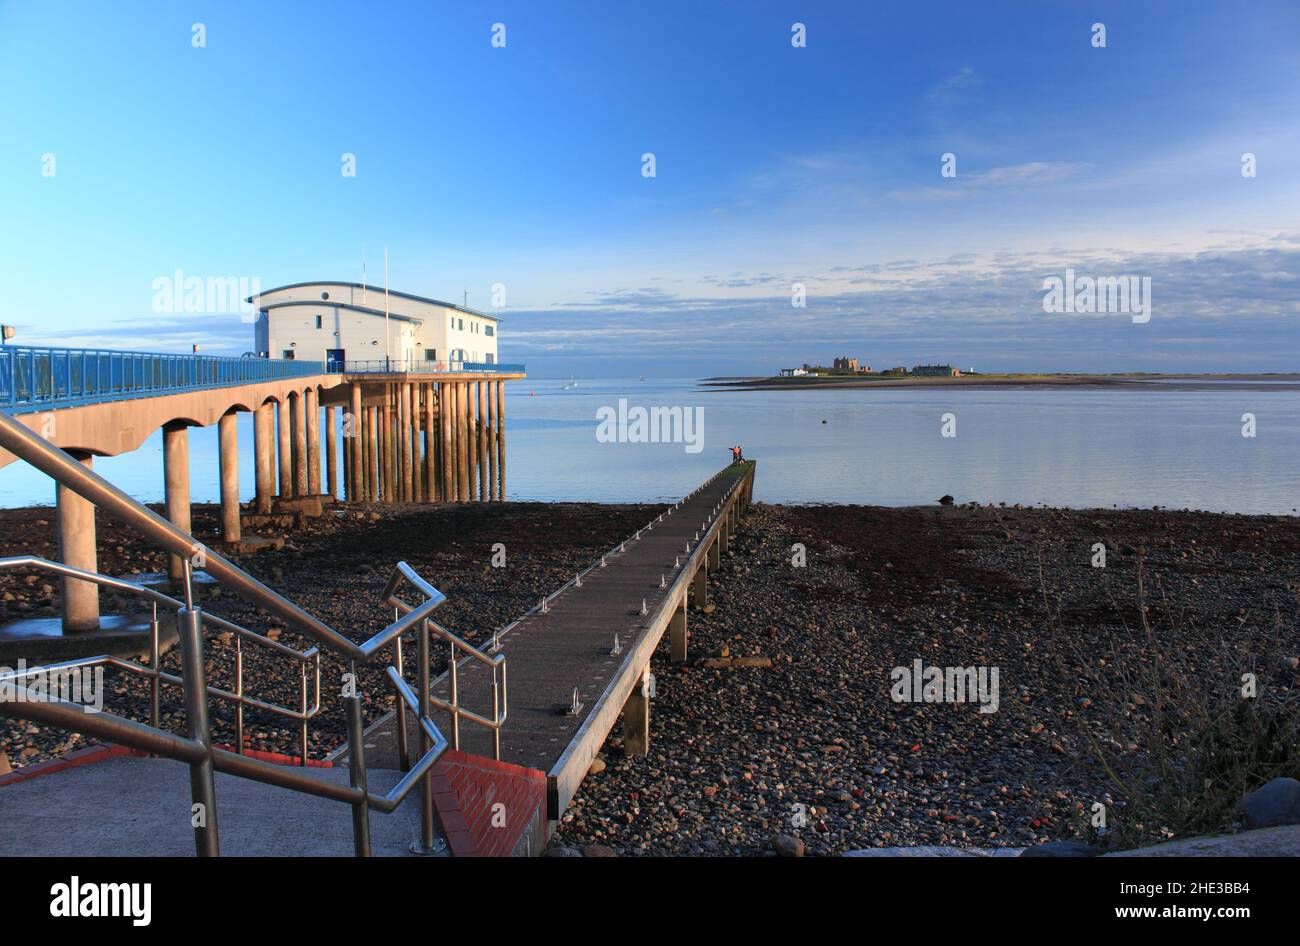 View of Piel Island from Roa Island Stock Photo